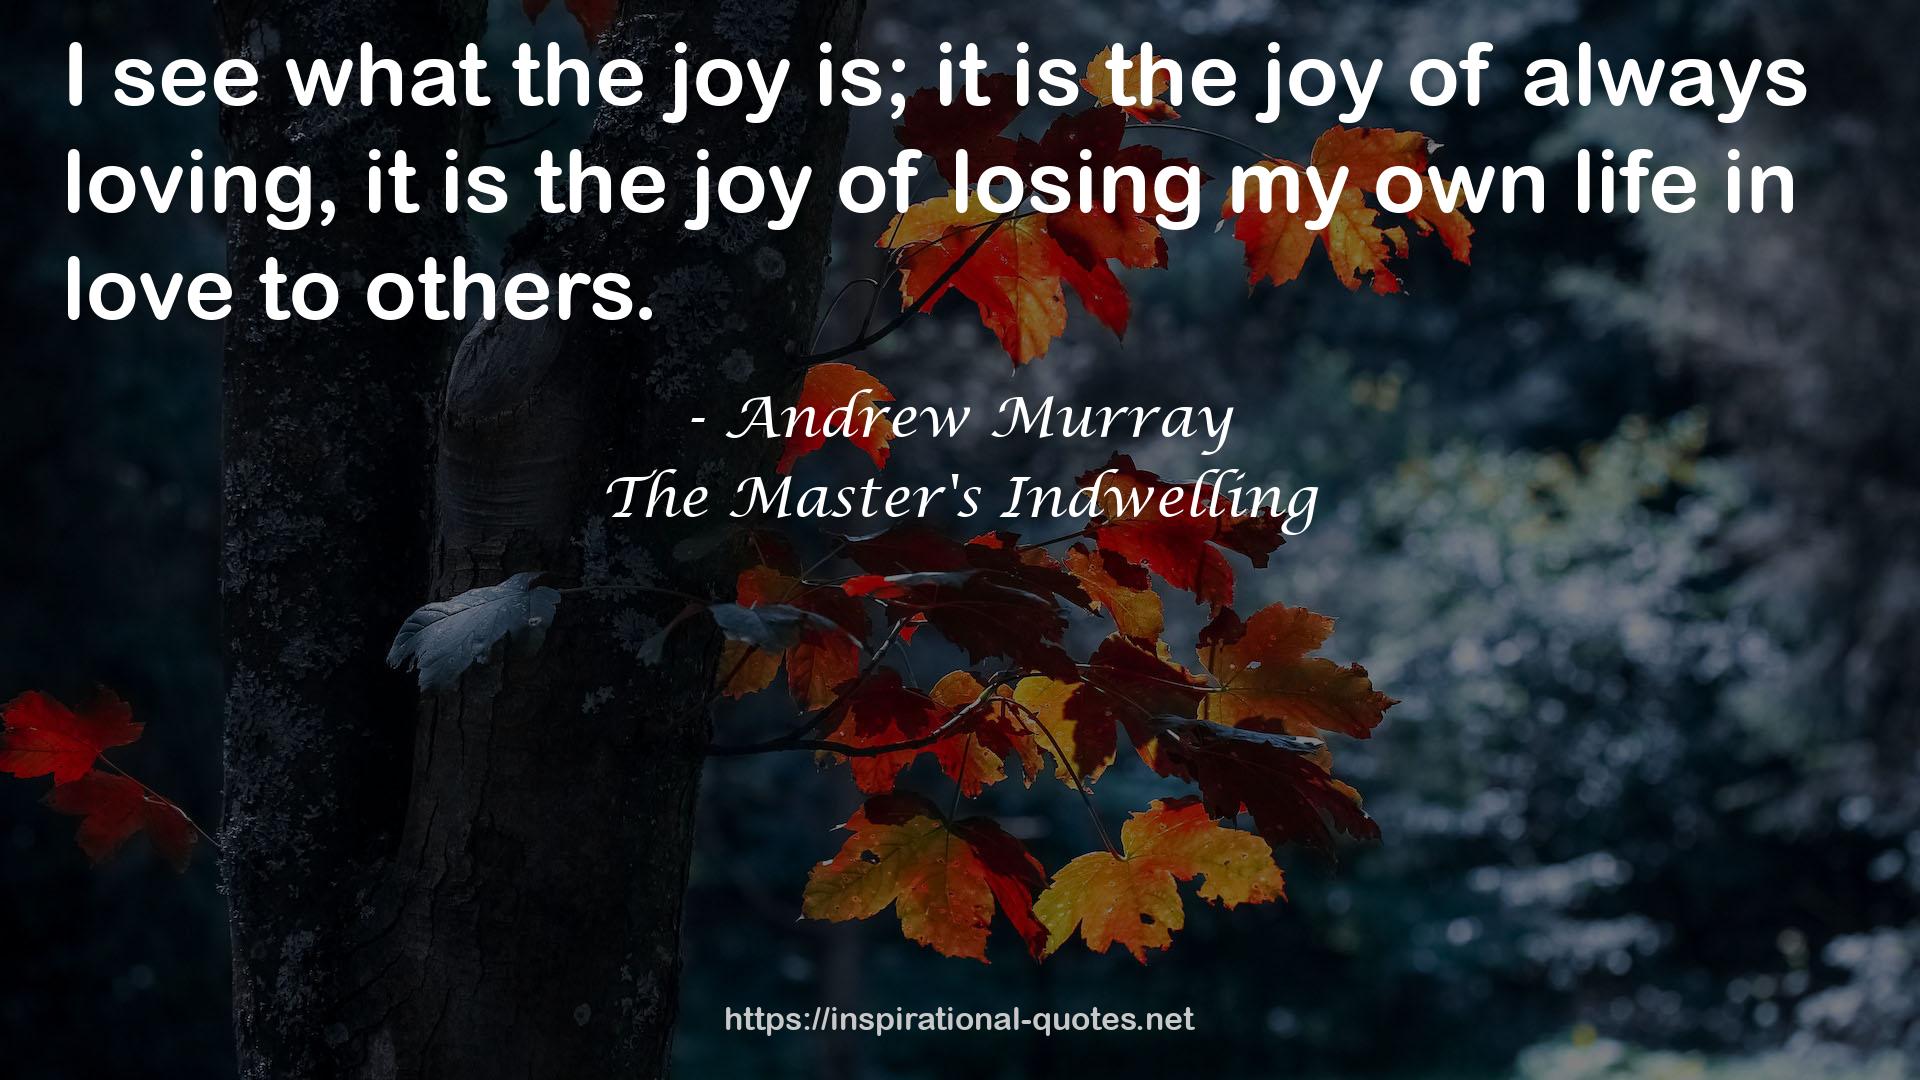 The Master's Indwelling QUOTES